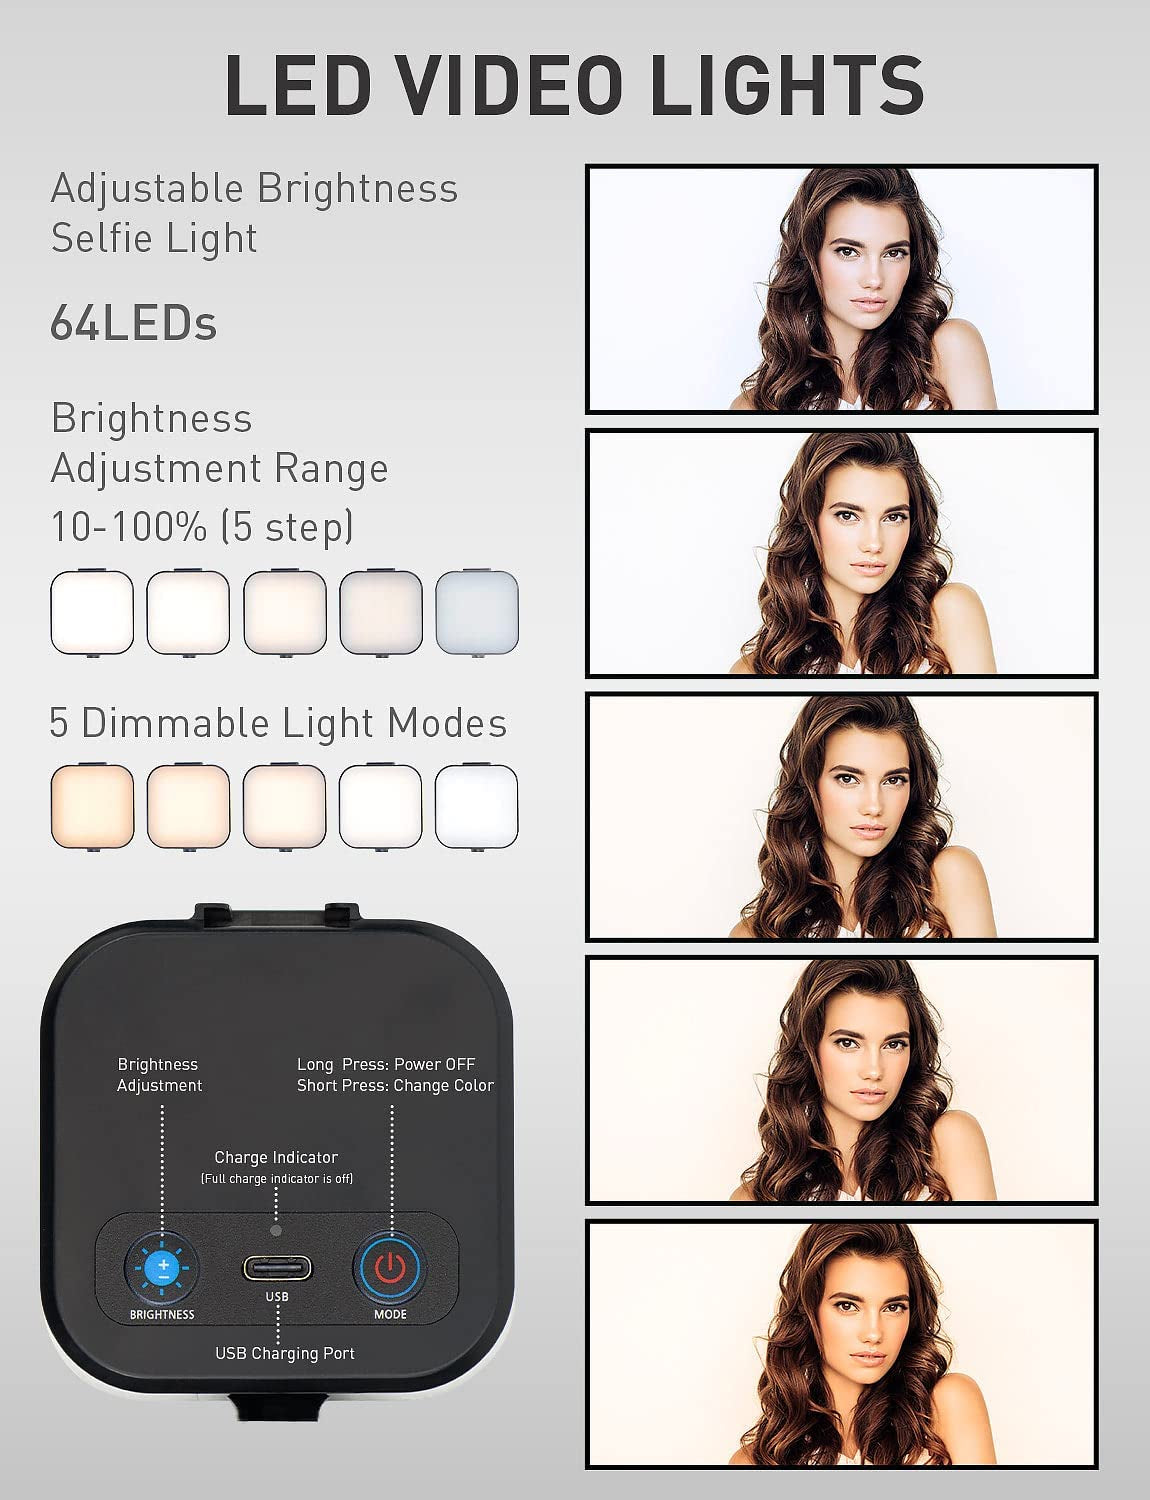 Portable 64 LED Rechargeable Selfie Light - 5 Lighting Modes - Clip-on Fill Lights for iPhone, Cell Phone, Laptop, TikTok, Selfie, Video Conference, Camera